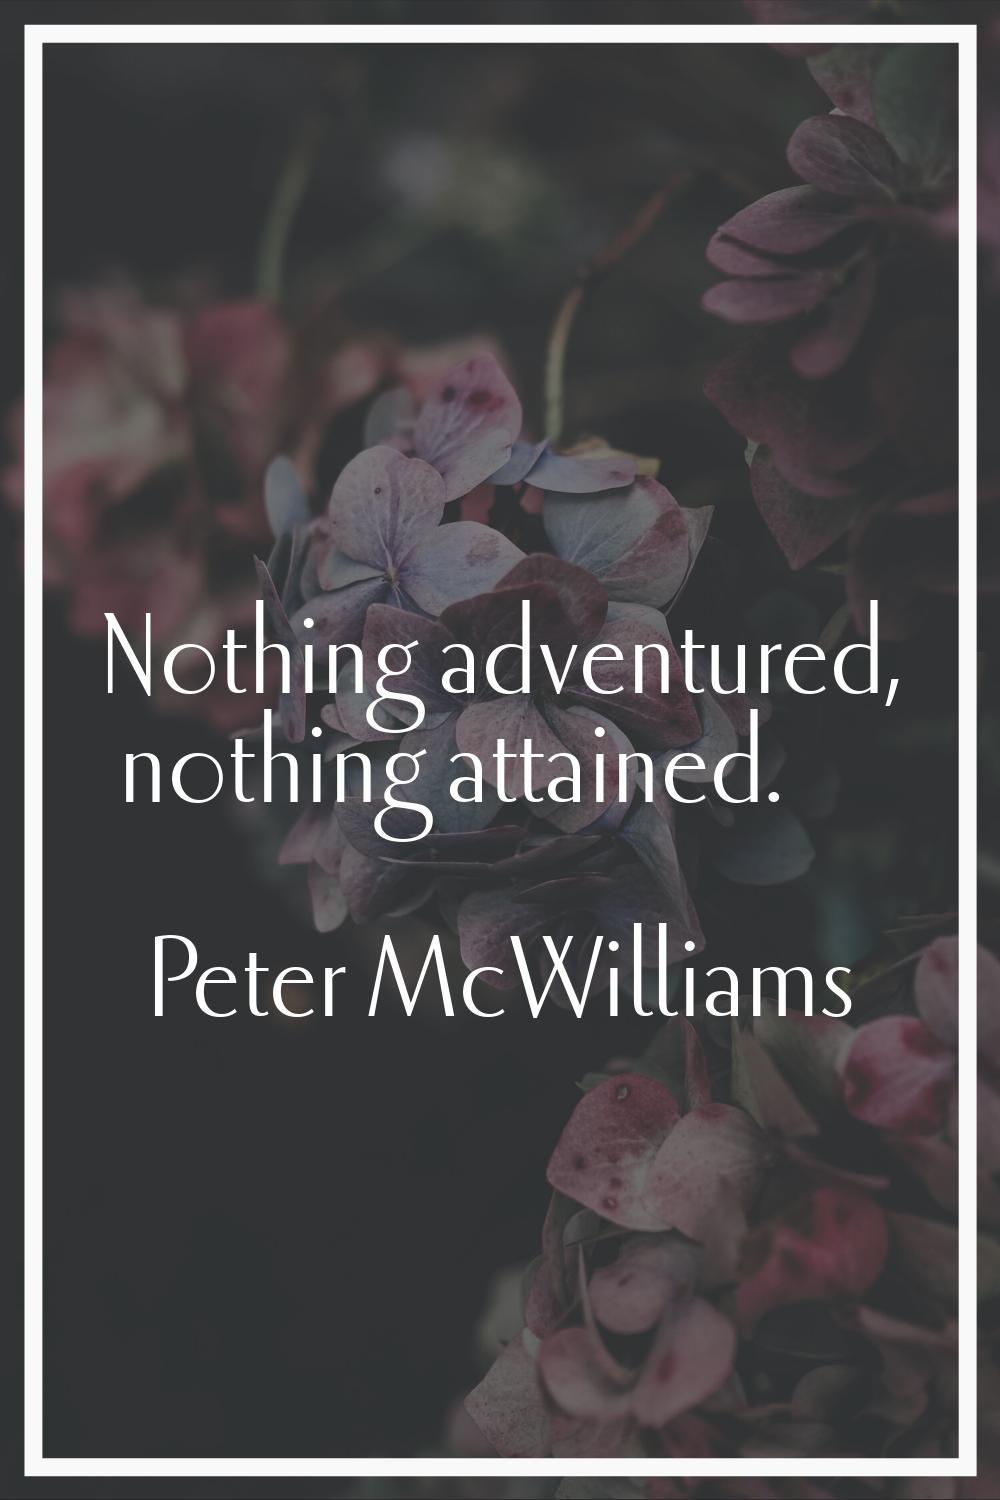 Nothing adventured, nothing attained.